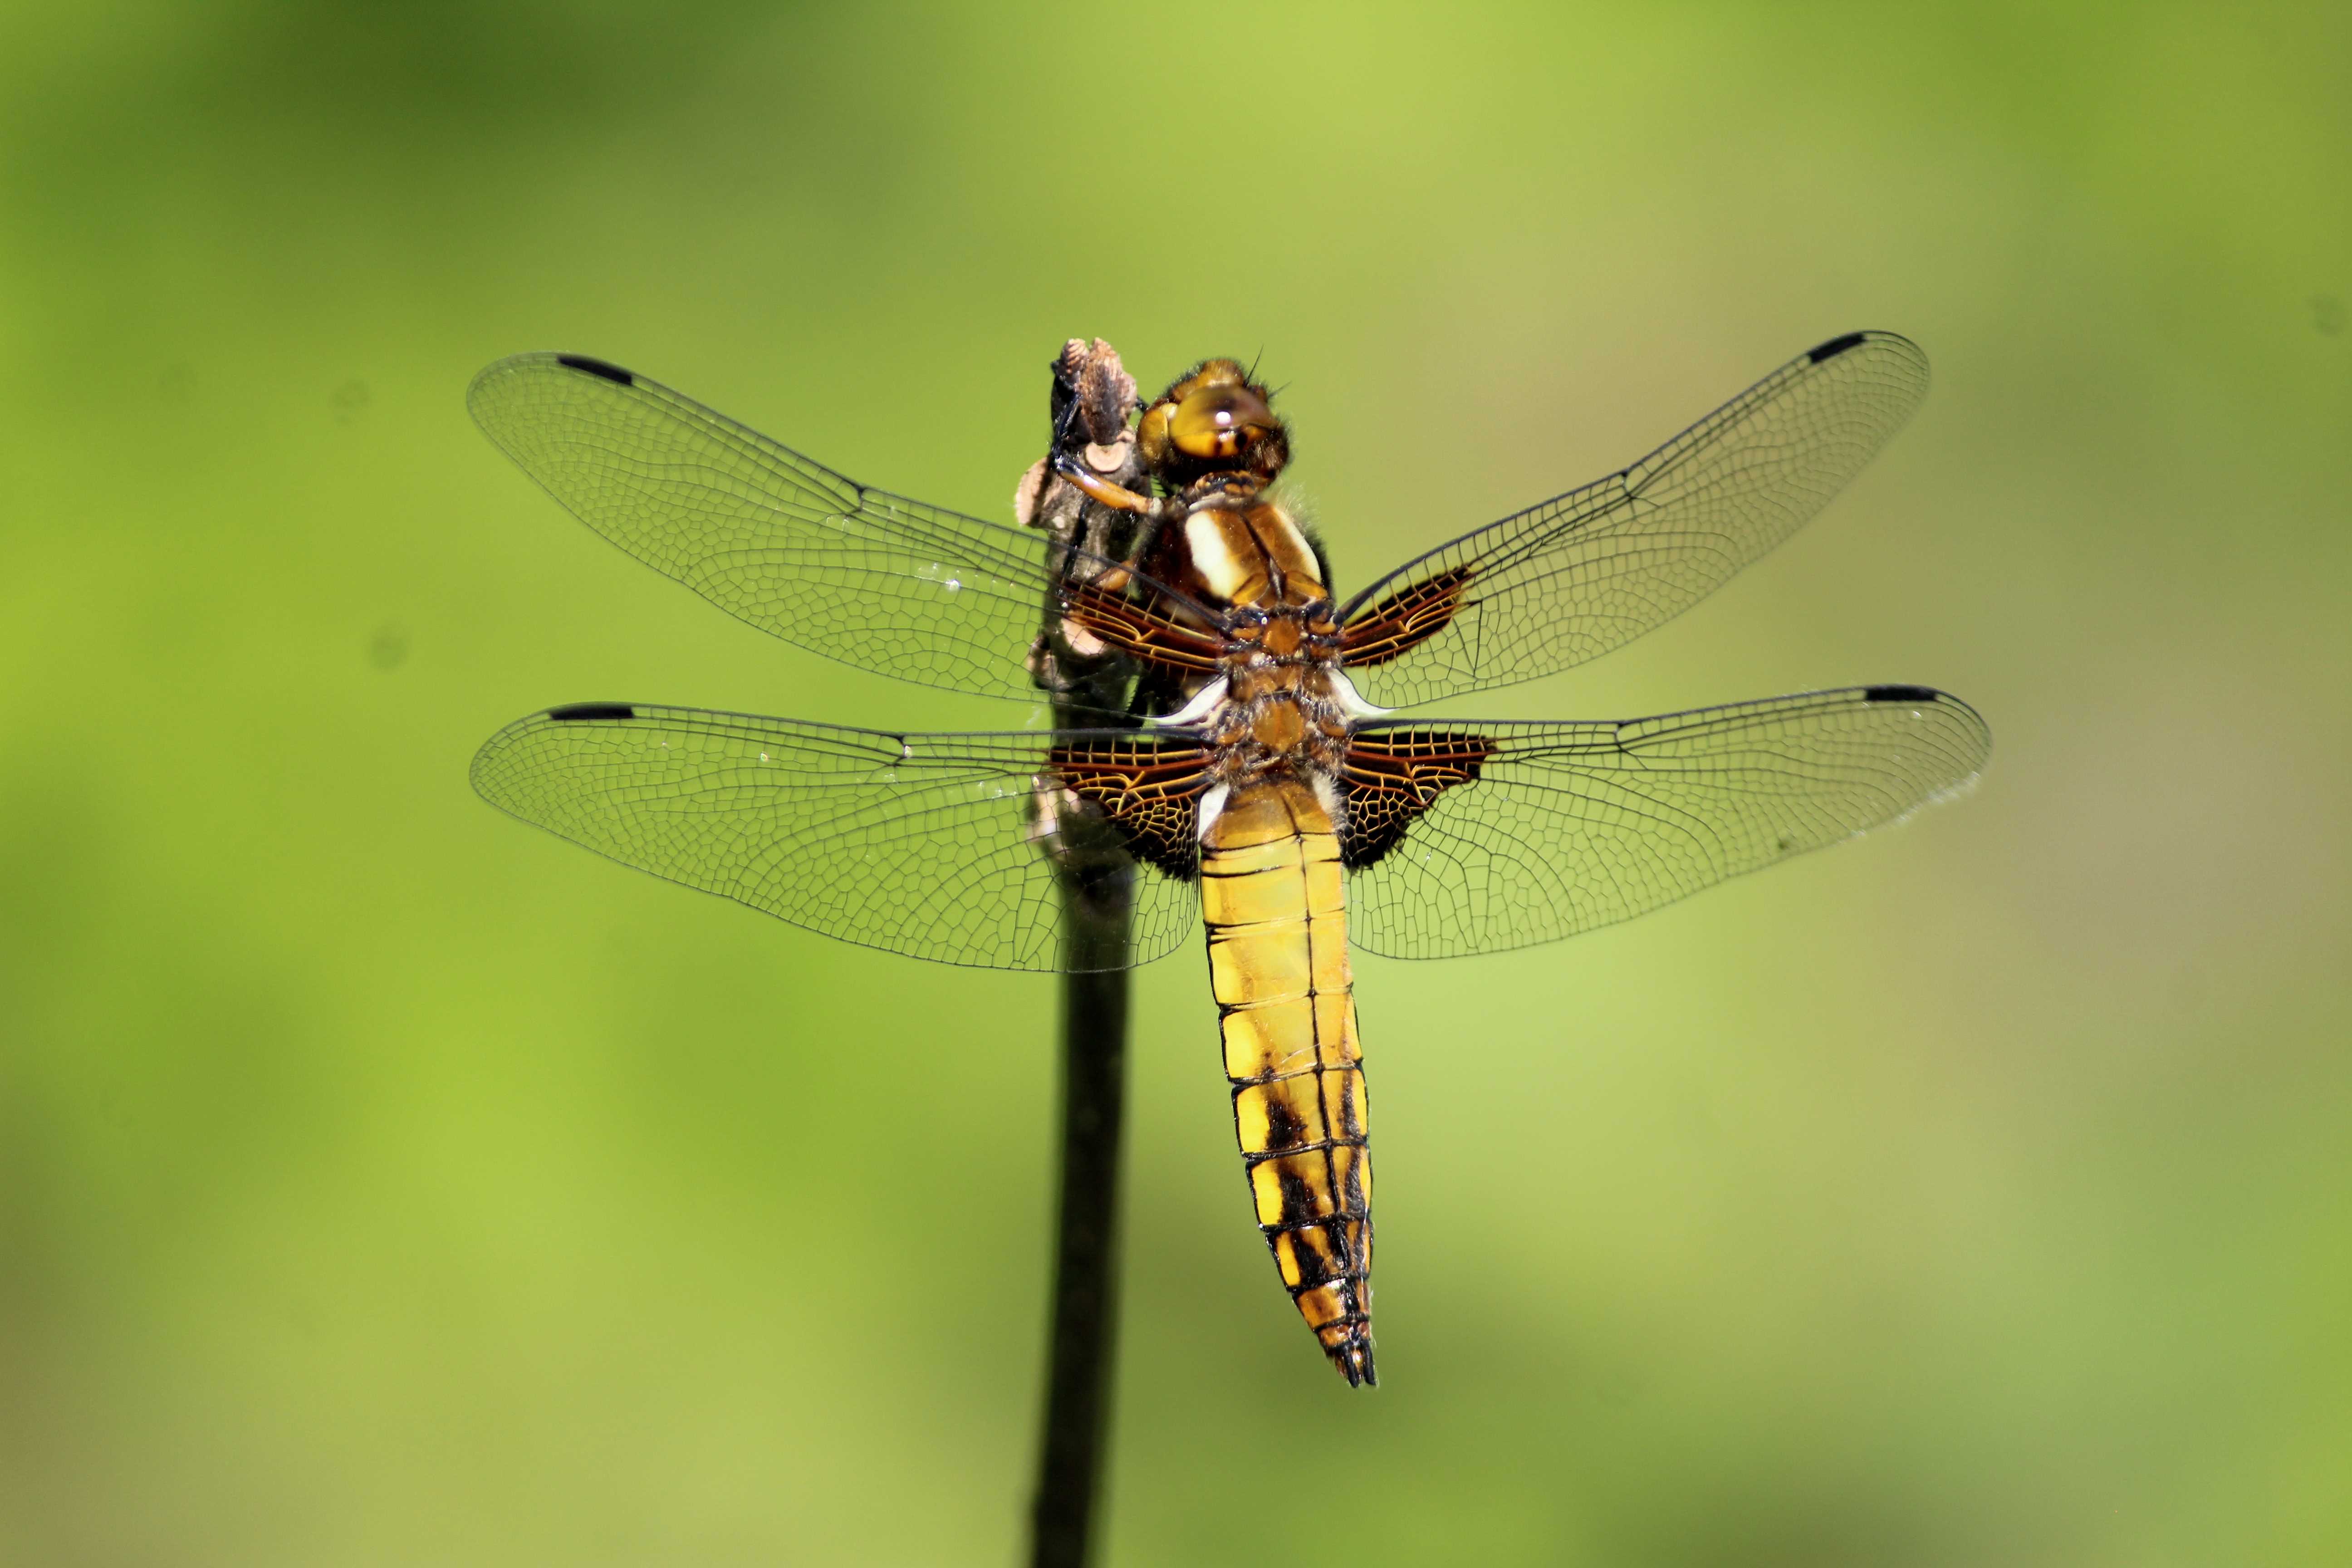 A close-up photo if a dragonfly against green background.